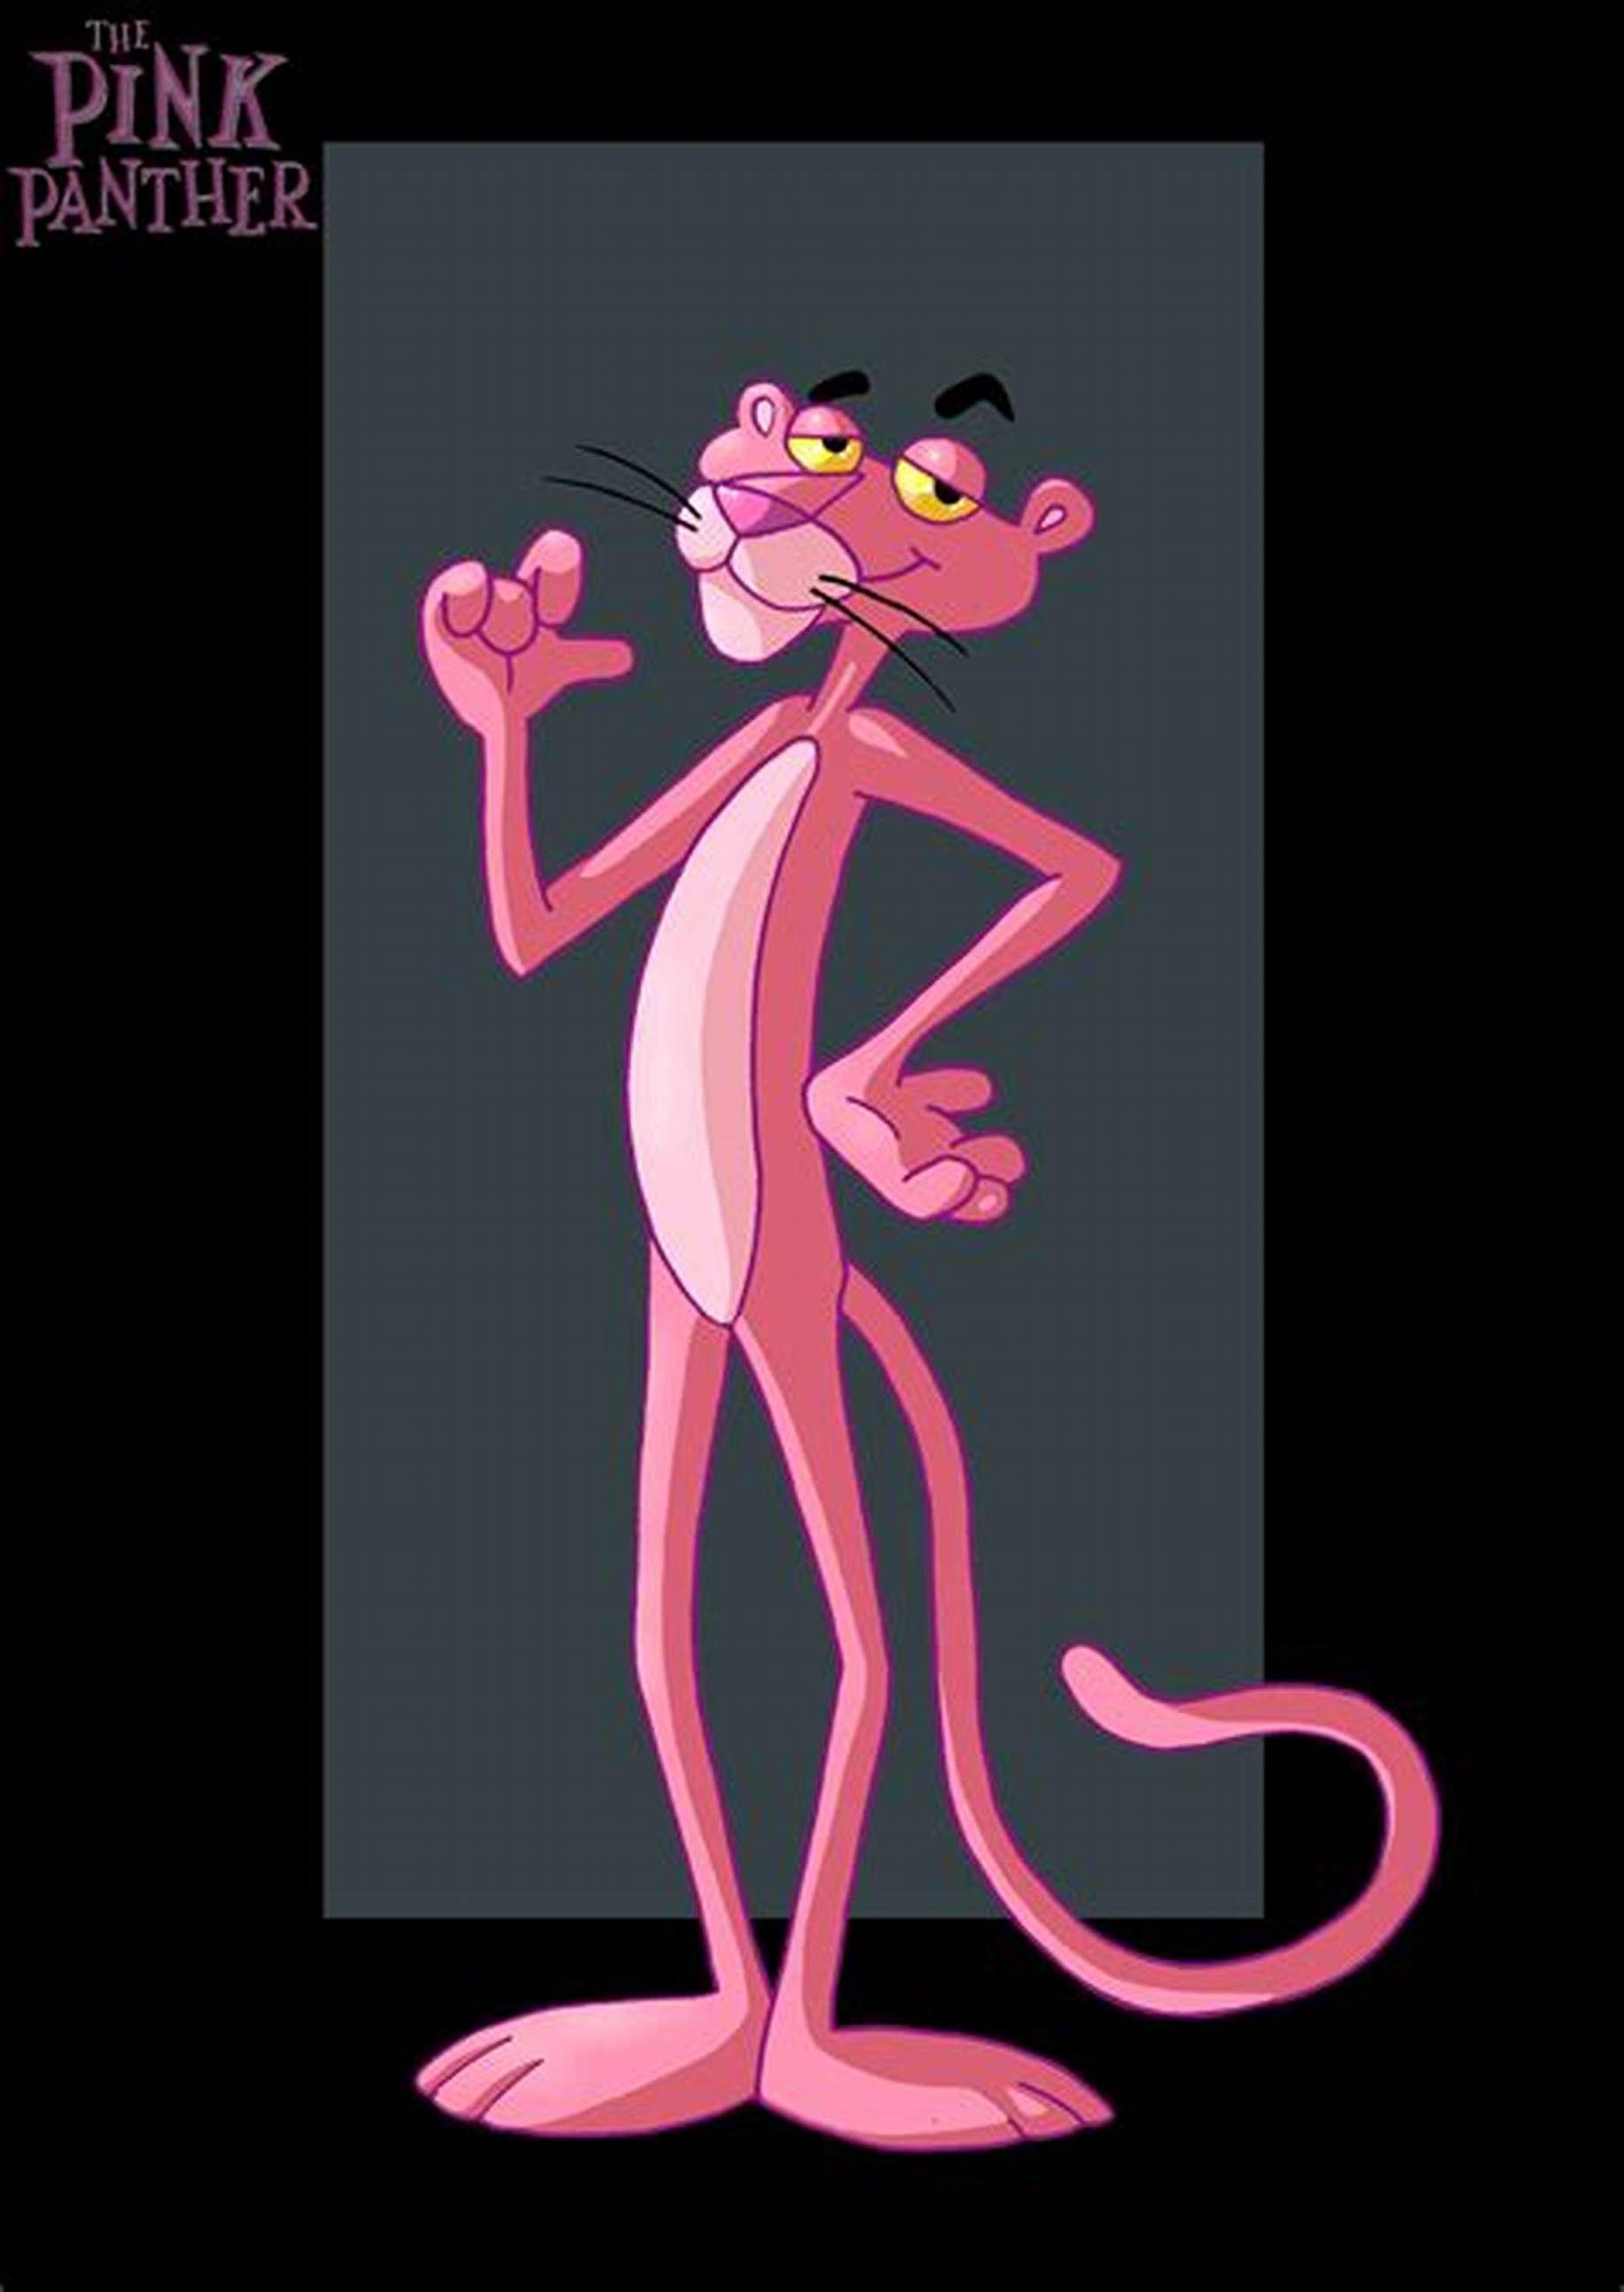 640x1136 The Pink Panther One Iphone 5 wallpaper